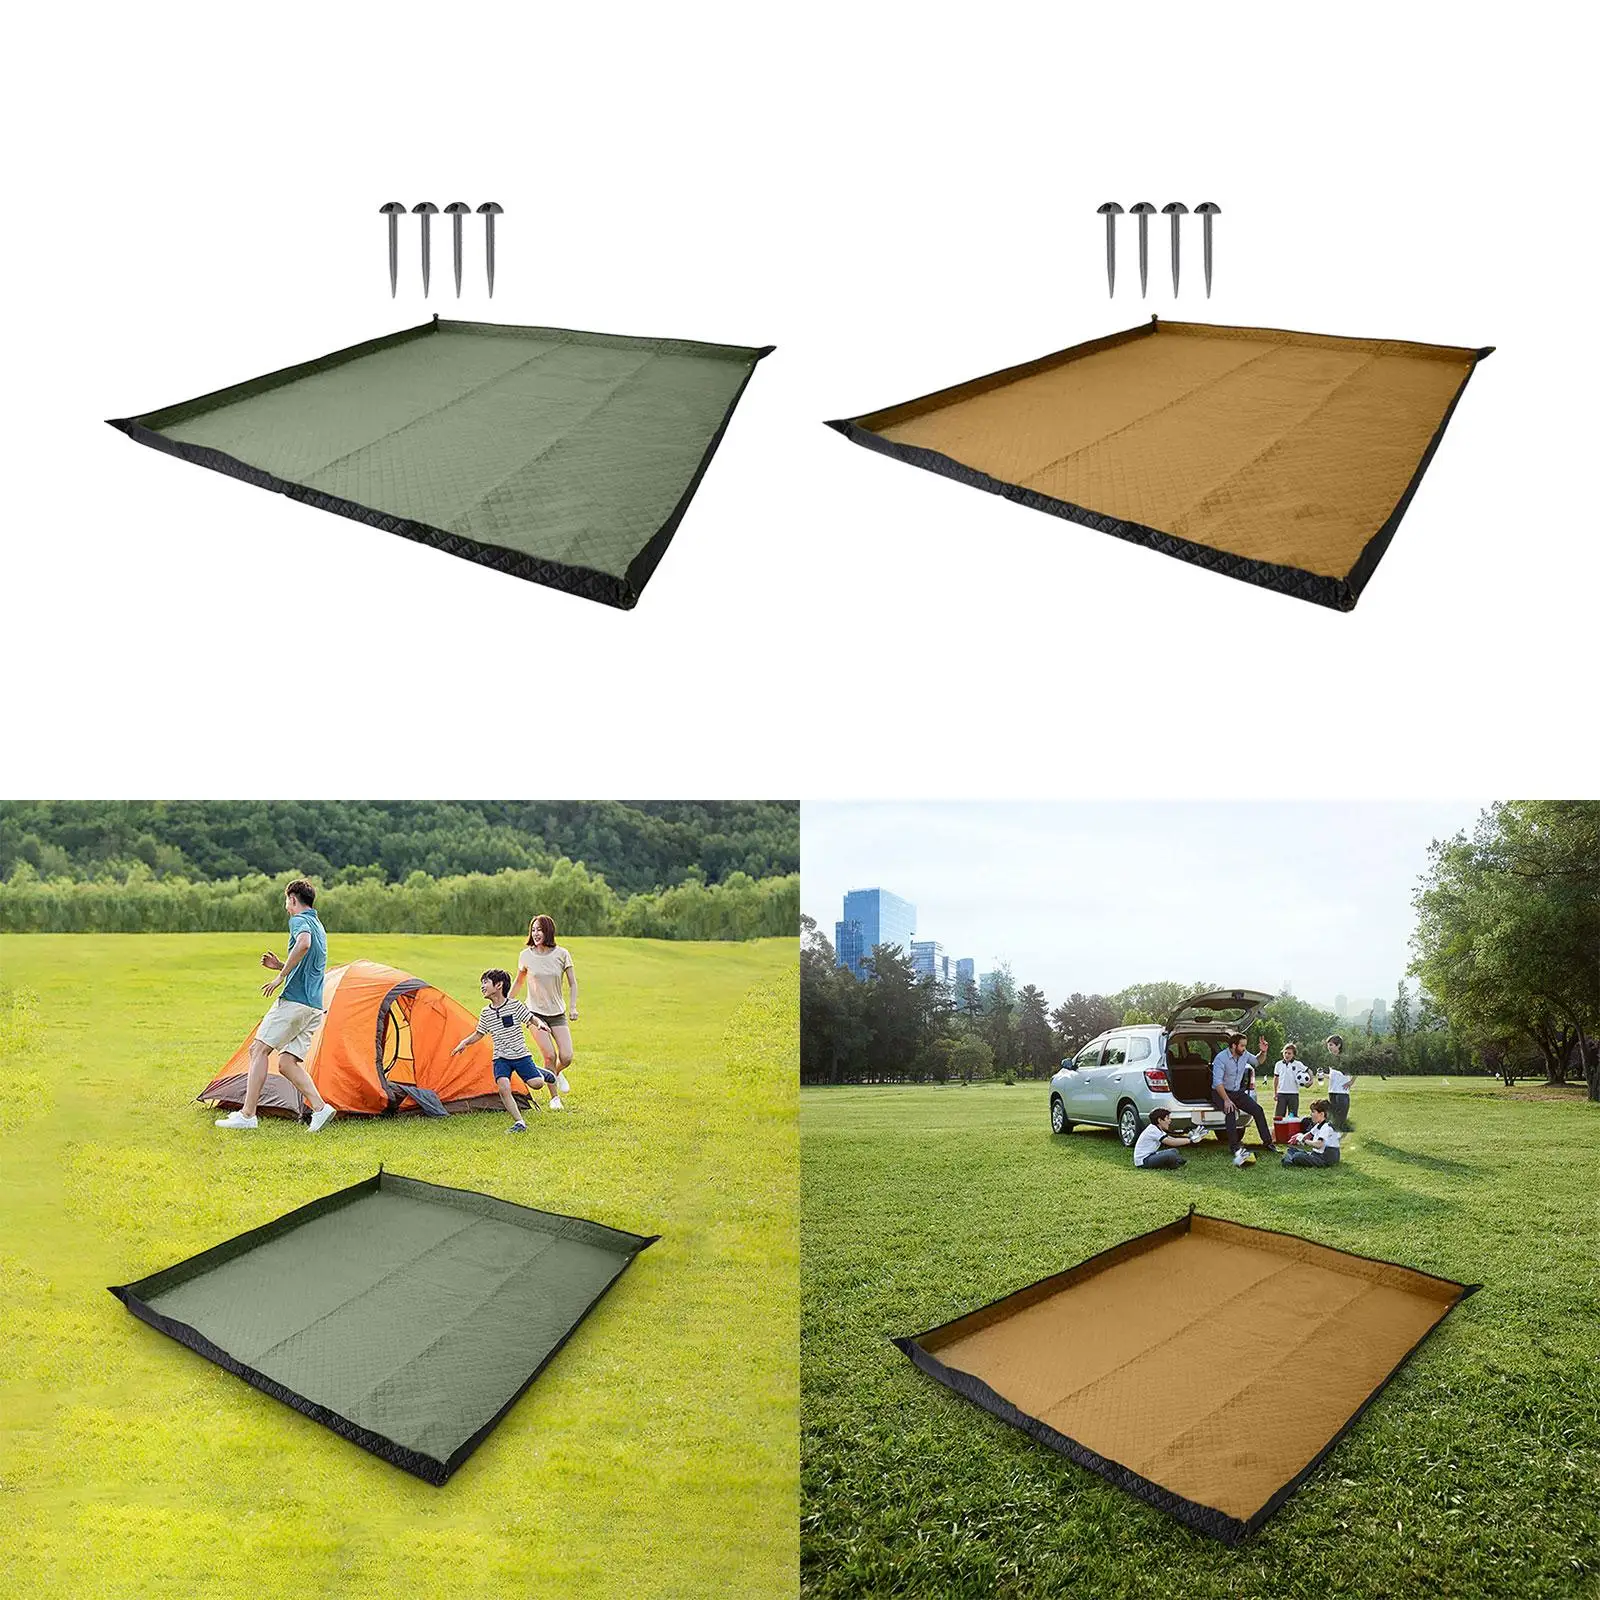 Sleeping Pad Foldable Park Blanket 200cmx200cm Portable Rug Mattress Tent Pad for Camping Concerts Party Backpacking Family